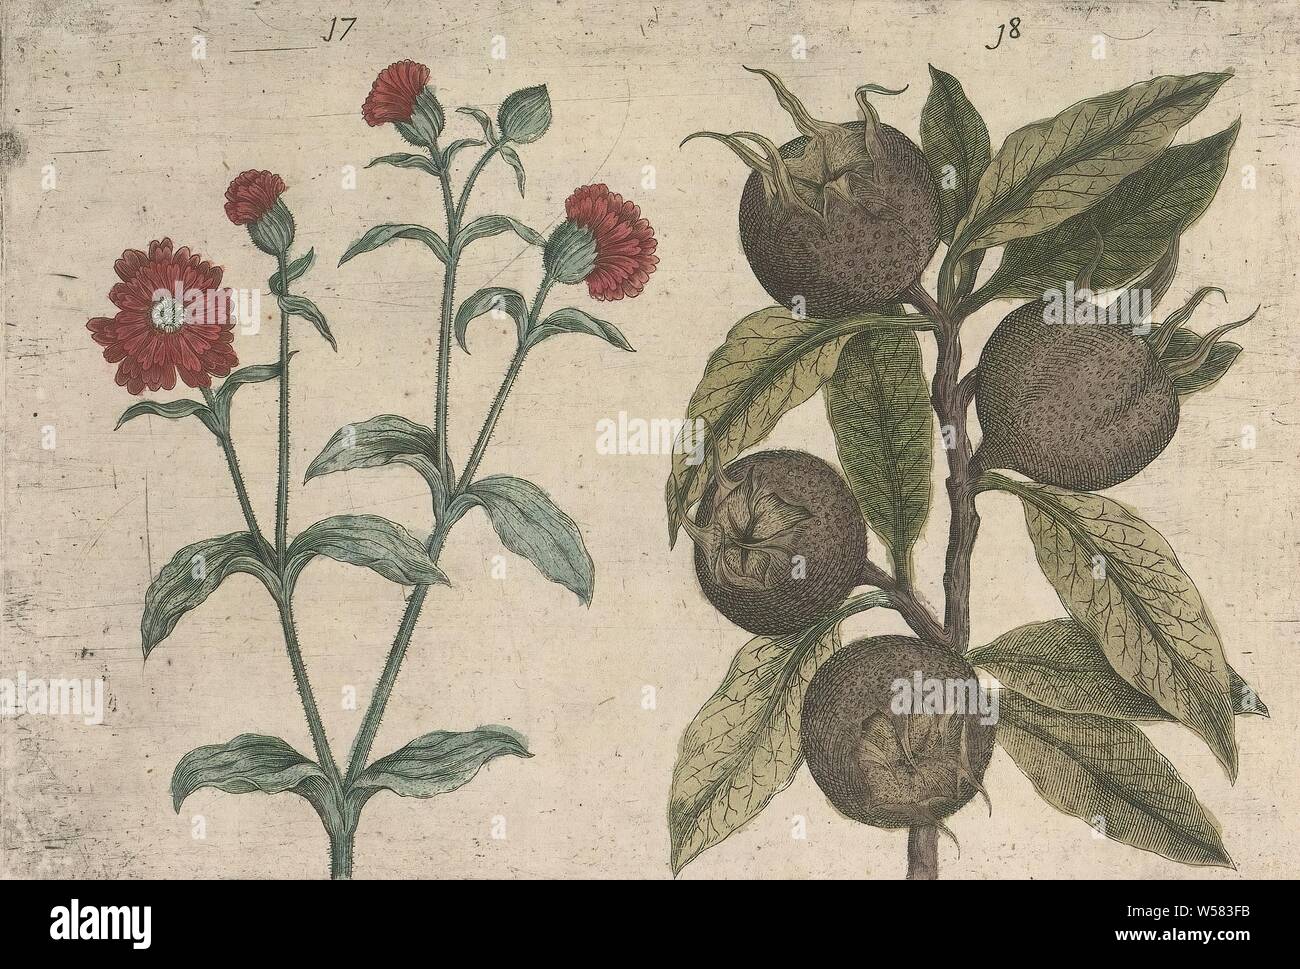 Day cuckoo flower (Silene dioica) and medlar (Mespilus germanica), Day cuckoo flower and medlar. FIGs. 17 and 18 on a sheet hand numbered 10. In: Anselmi Boetii de Boot I.C. Brugensis & Rodolphi II. Imp. Novel. medici a cubiculis Florum, Herbarum, ac fructuum selectiorum icones, & vires pleraeque hactenus ignotæ. Part of the album with sheets and plates from De Boodts herbarium from 1640. The twelfth of twelve albums with watercolors of animals, birds and plants known around 1600, commissioned by Emperor Rudolf II, anonymous, 1604 - 1632 and/or 1640, paper, ink, watercolor (paint), engraving Stock Photo